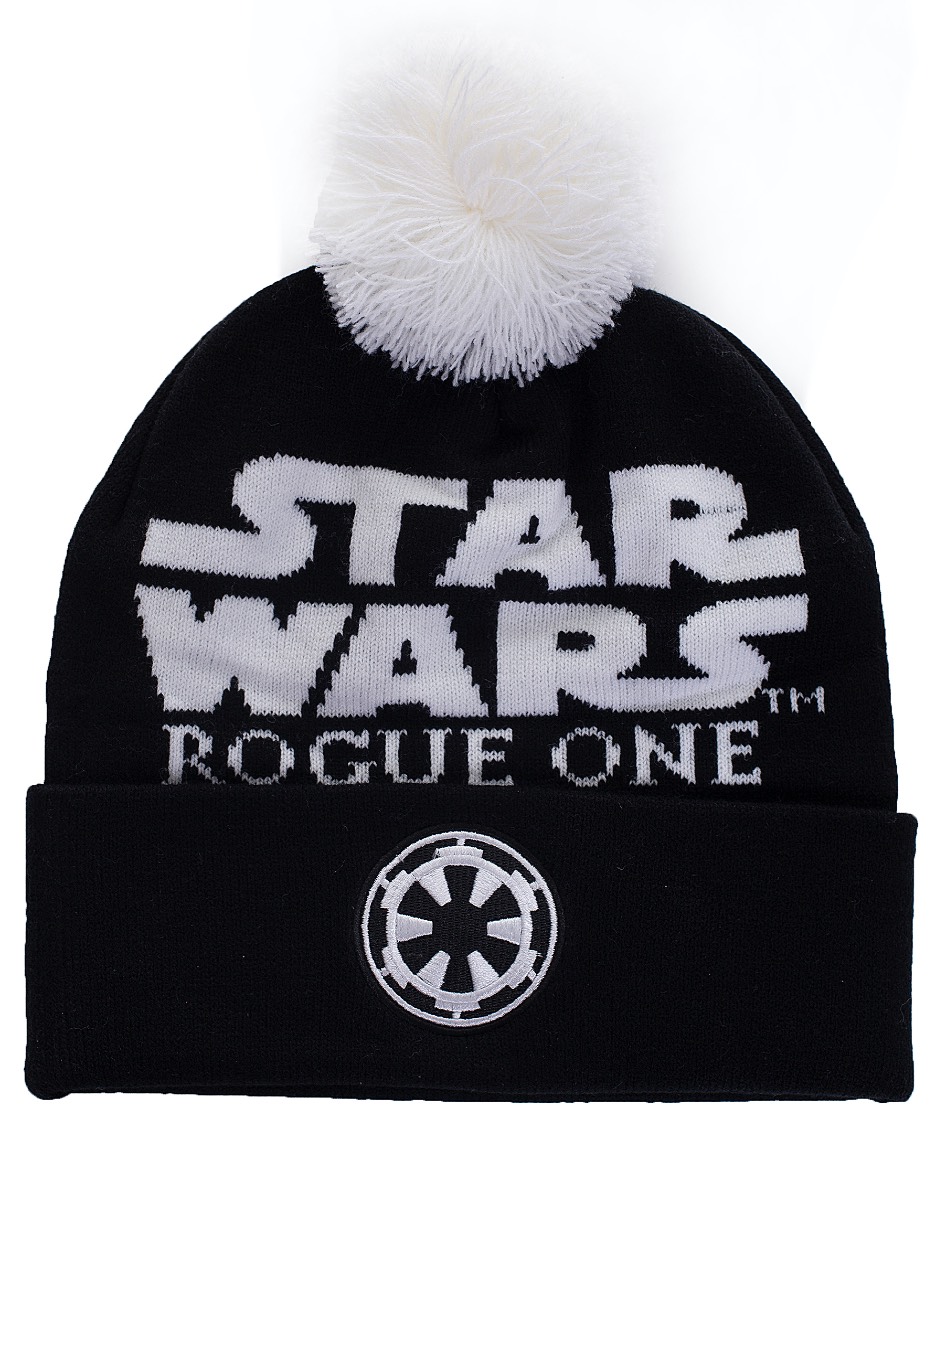 Rogue One: A Star Wars Story - Logo - Beanies